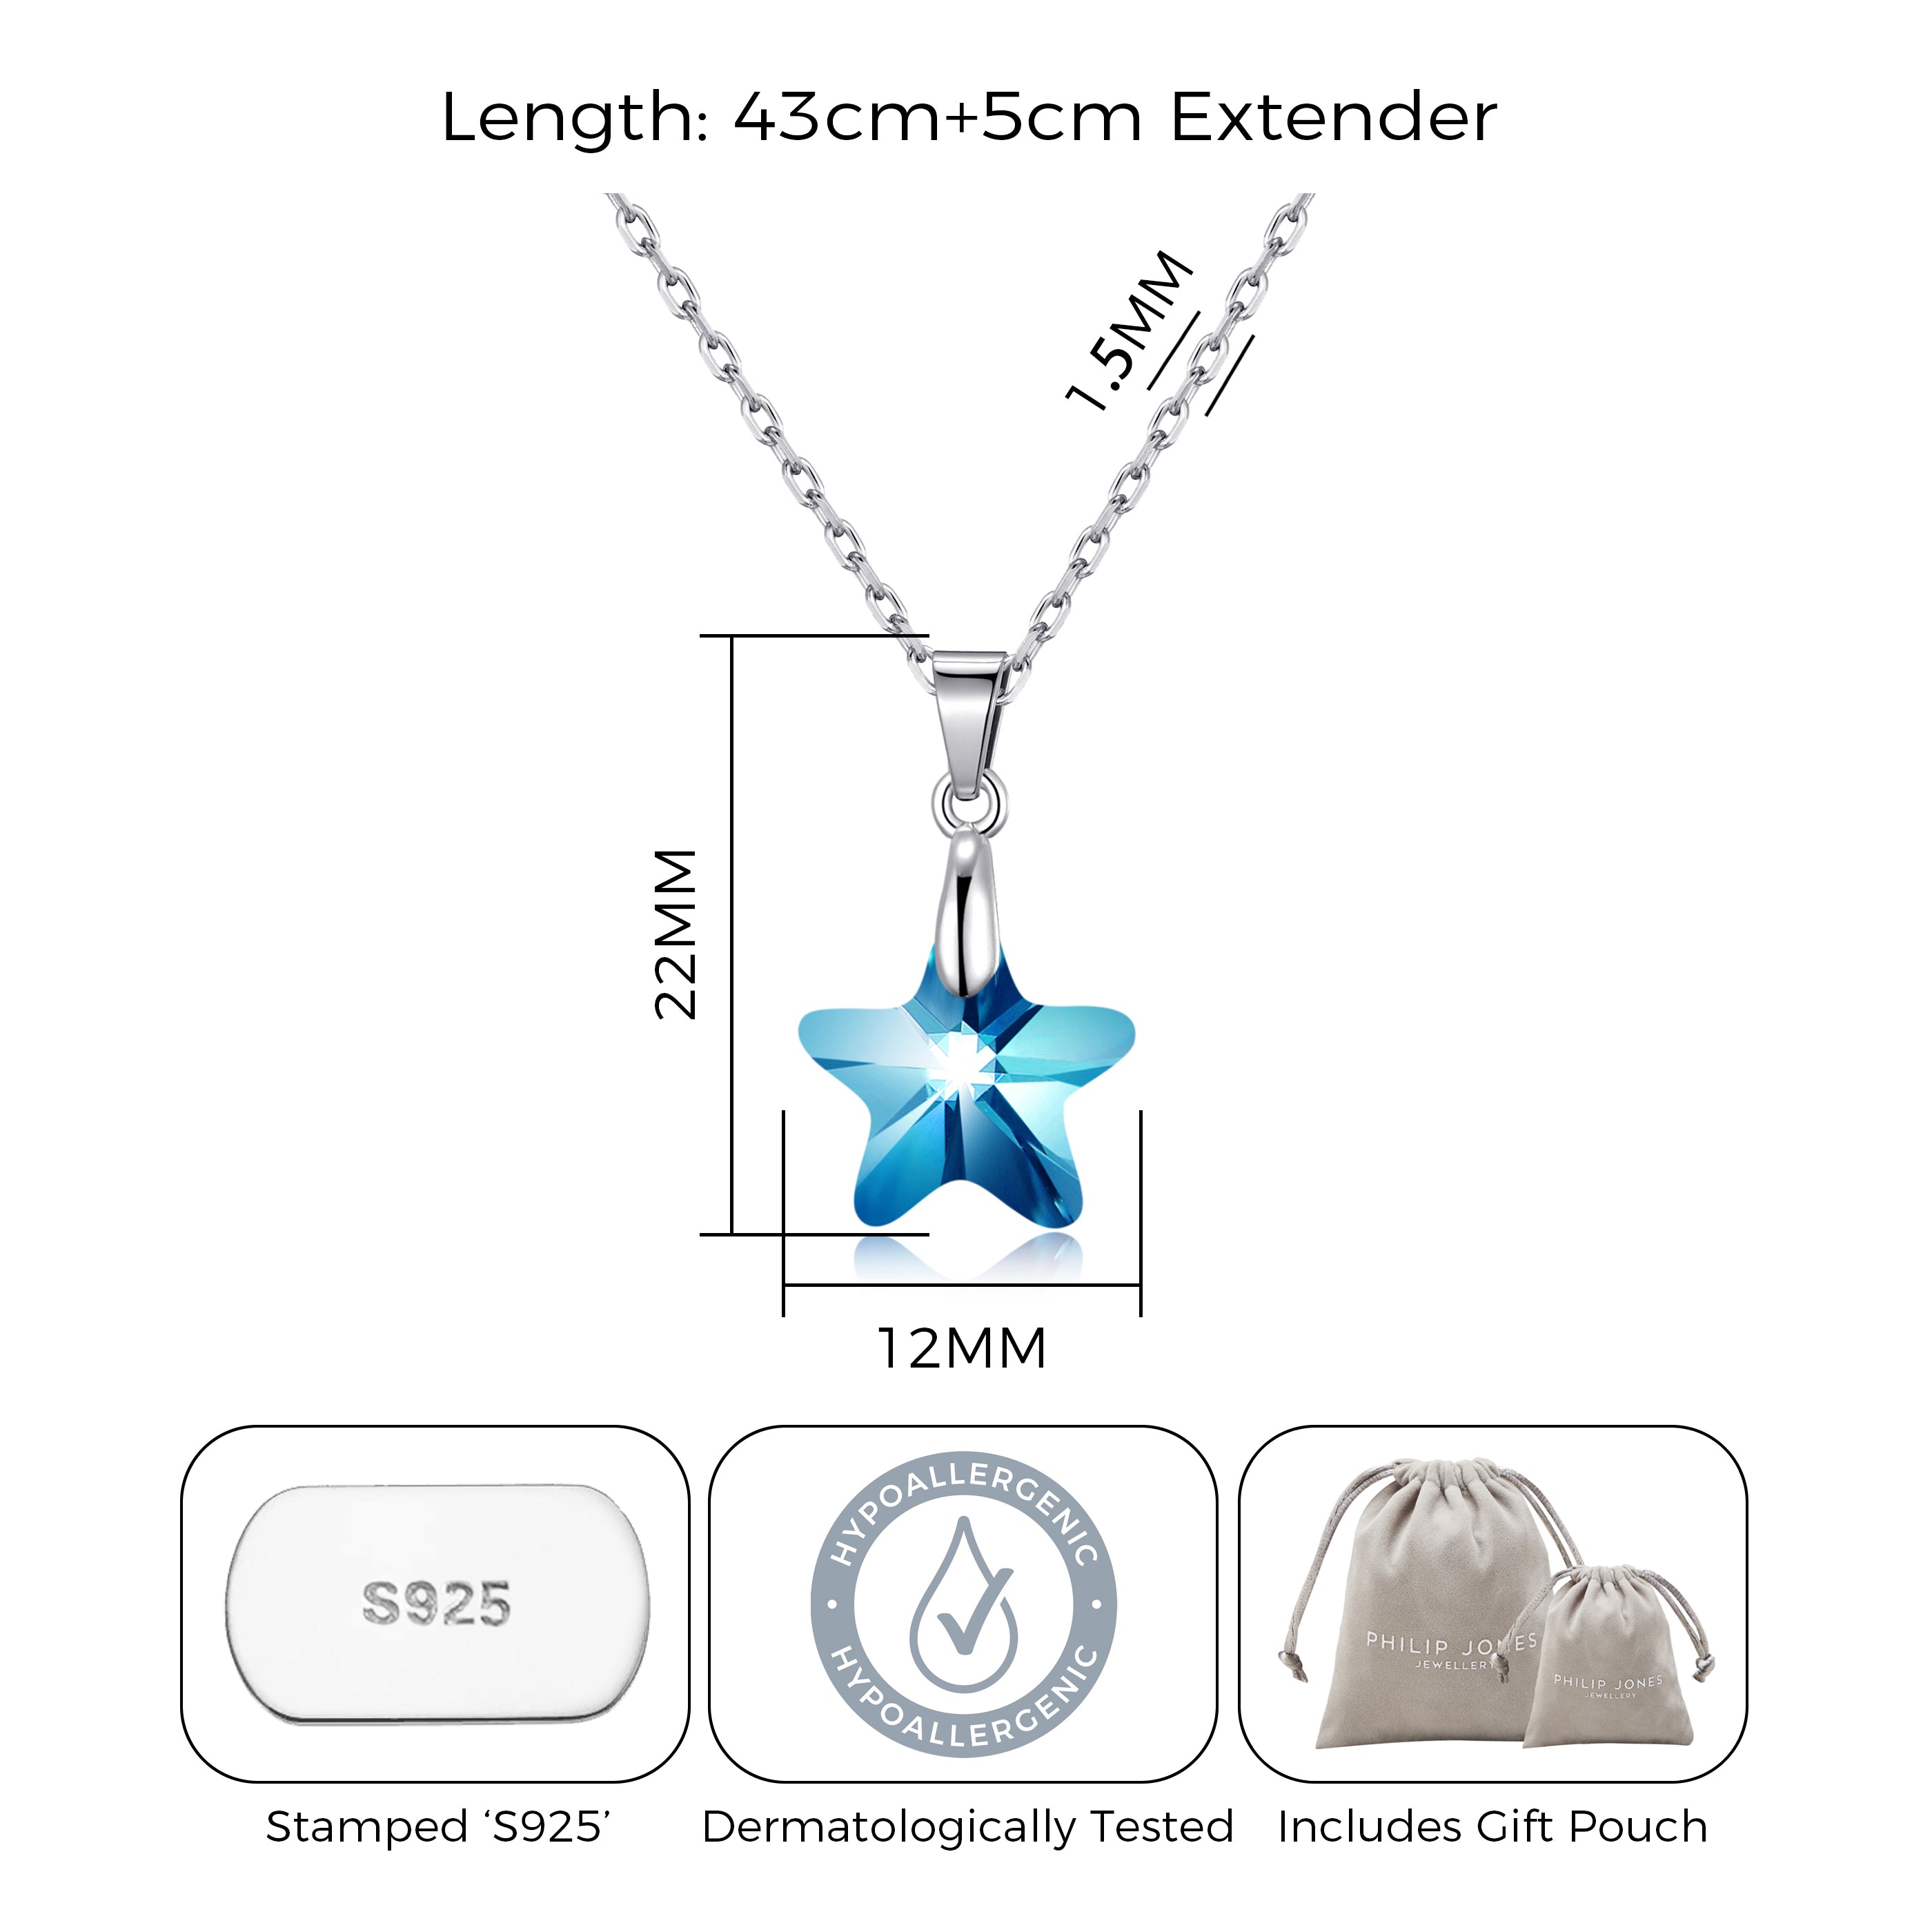 Sterling Silver Aquamarine Star Necklace Created with Zircondia® Crystals